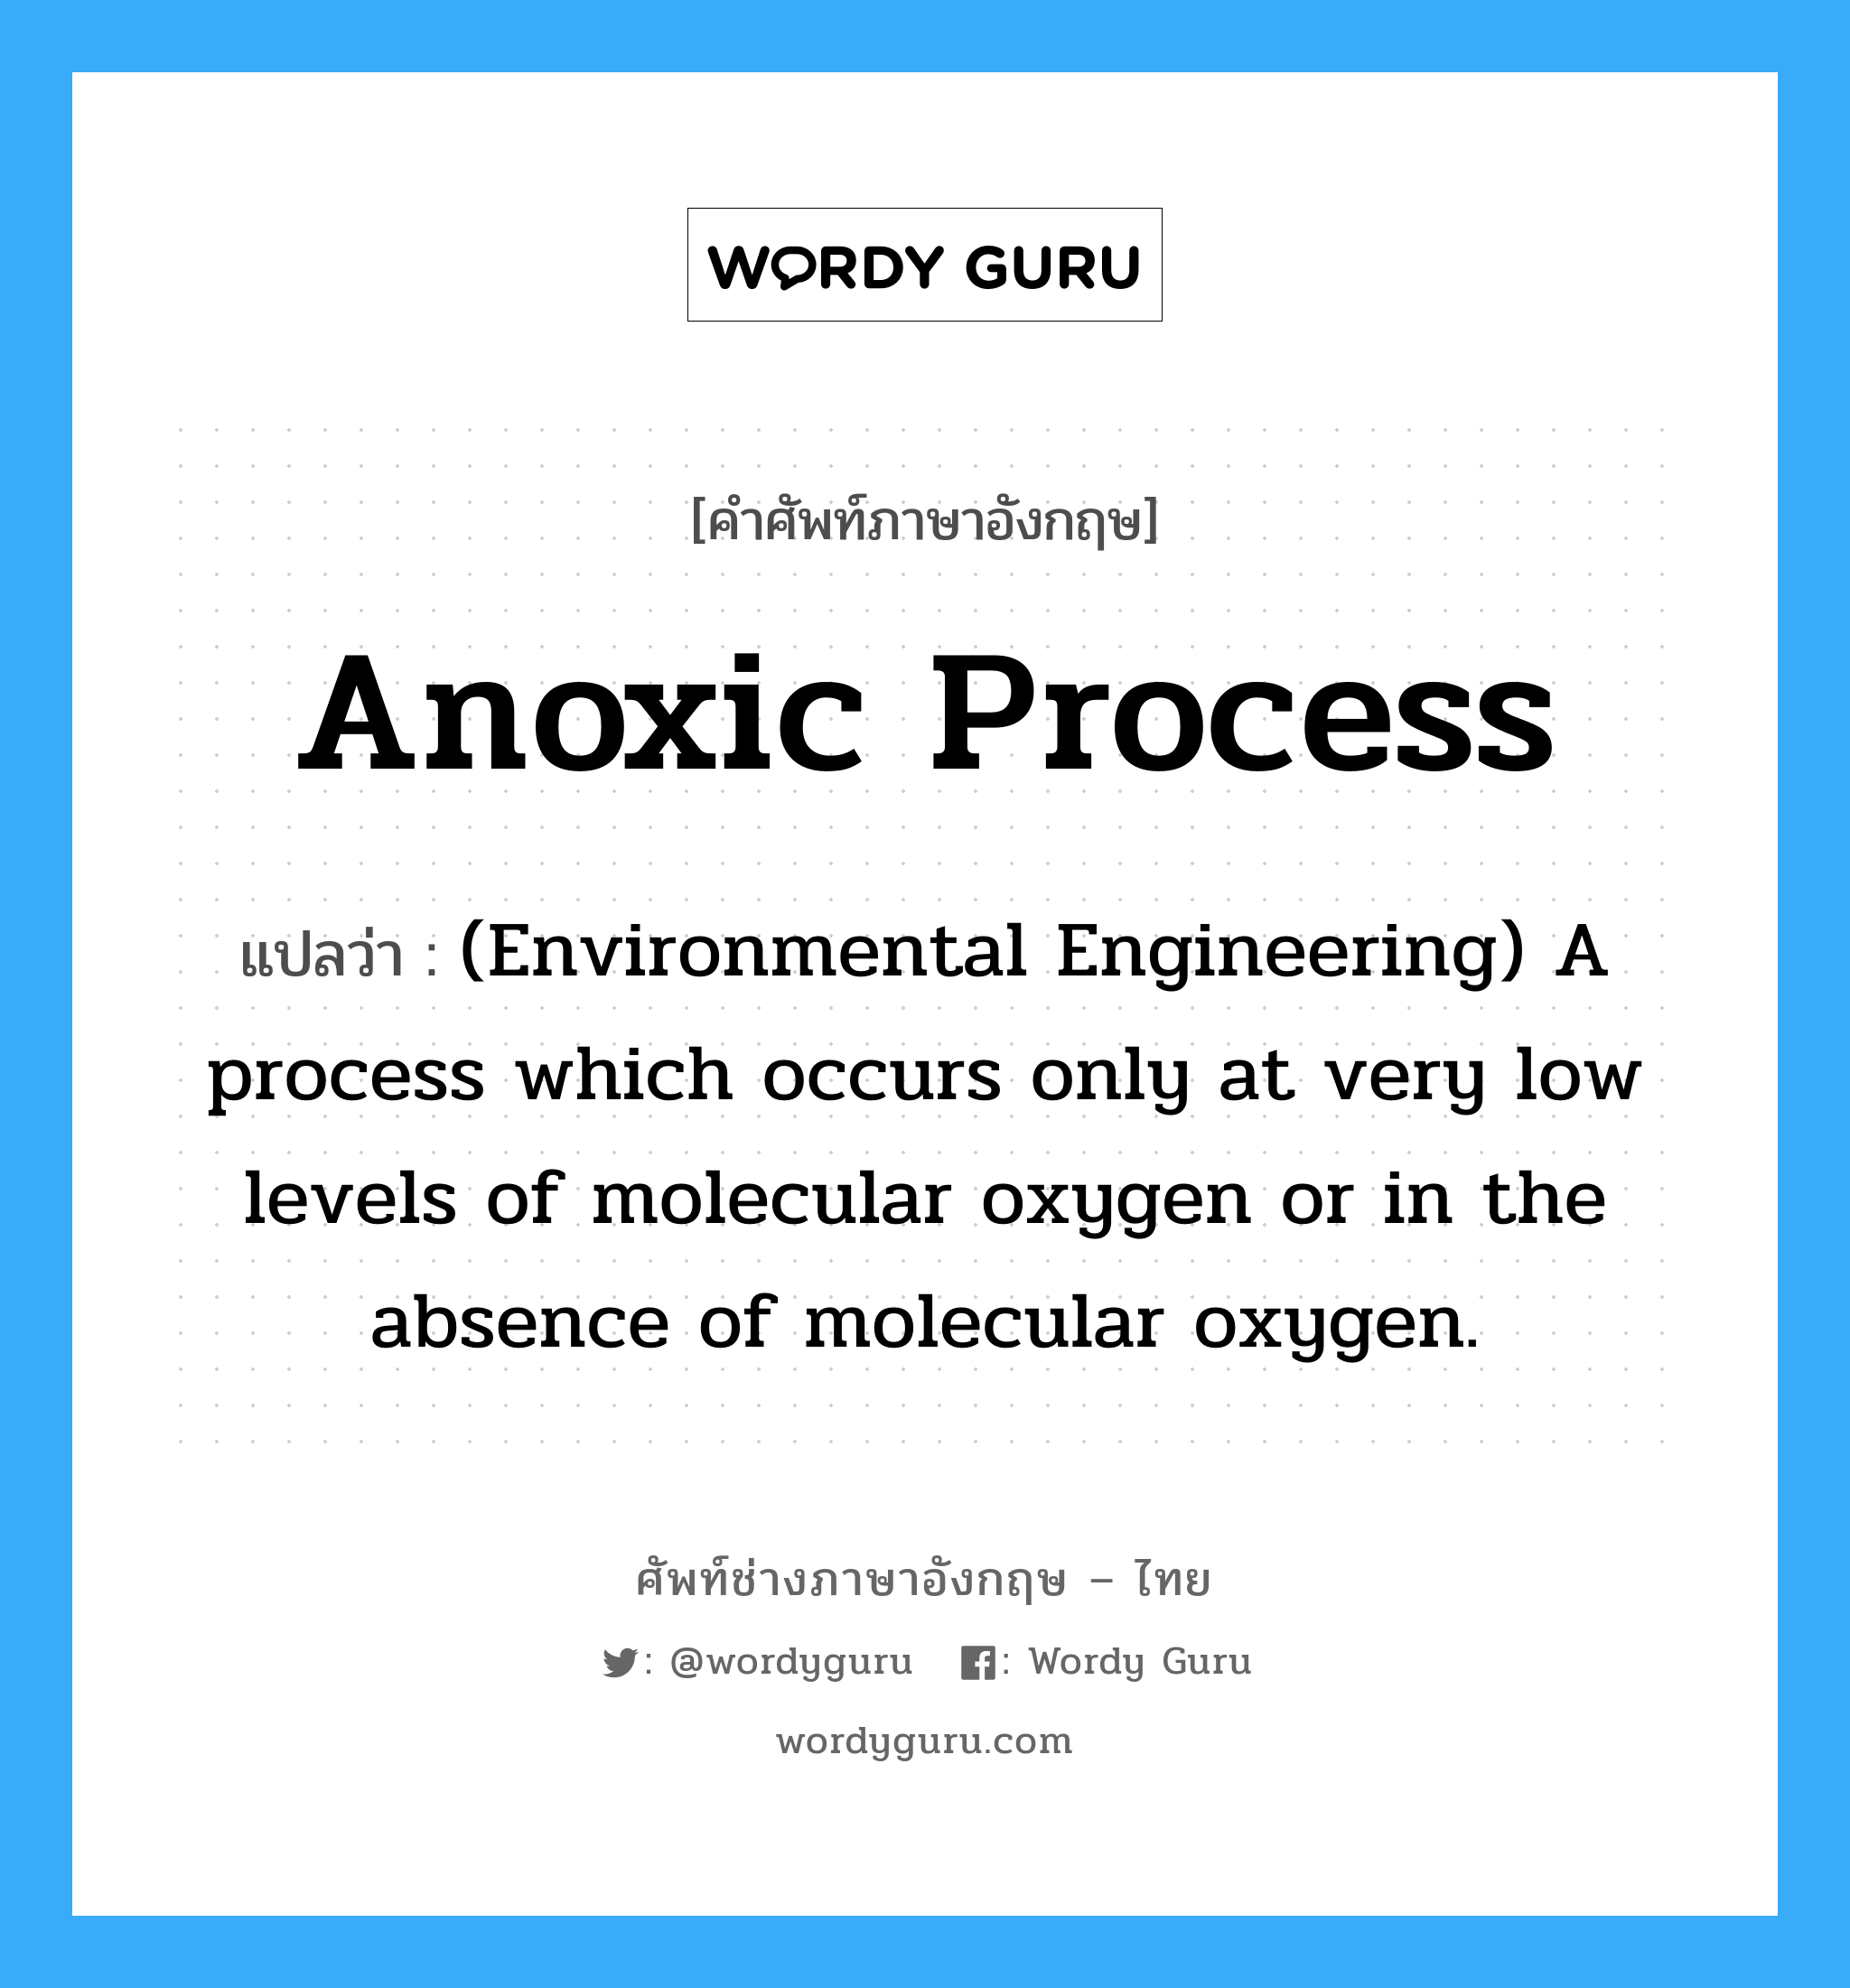 Anoxic process แปลว่า?, คำศัพท์ช่างภาษาอังกฤษ - ไทย Anoxic process คำศัพท์ภาษาอังกฤษ Anoxic process แปลว่า (Environmental Engineering) A process which occurs only at very low levels of molecular oxygen or in the absence of molecular oxygen.